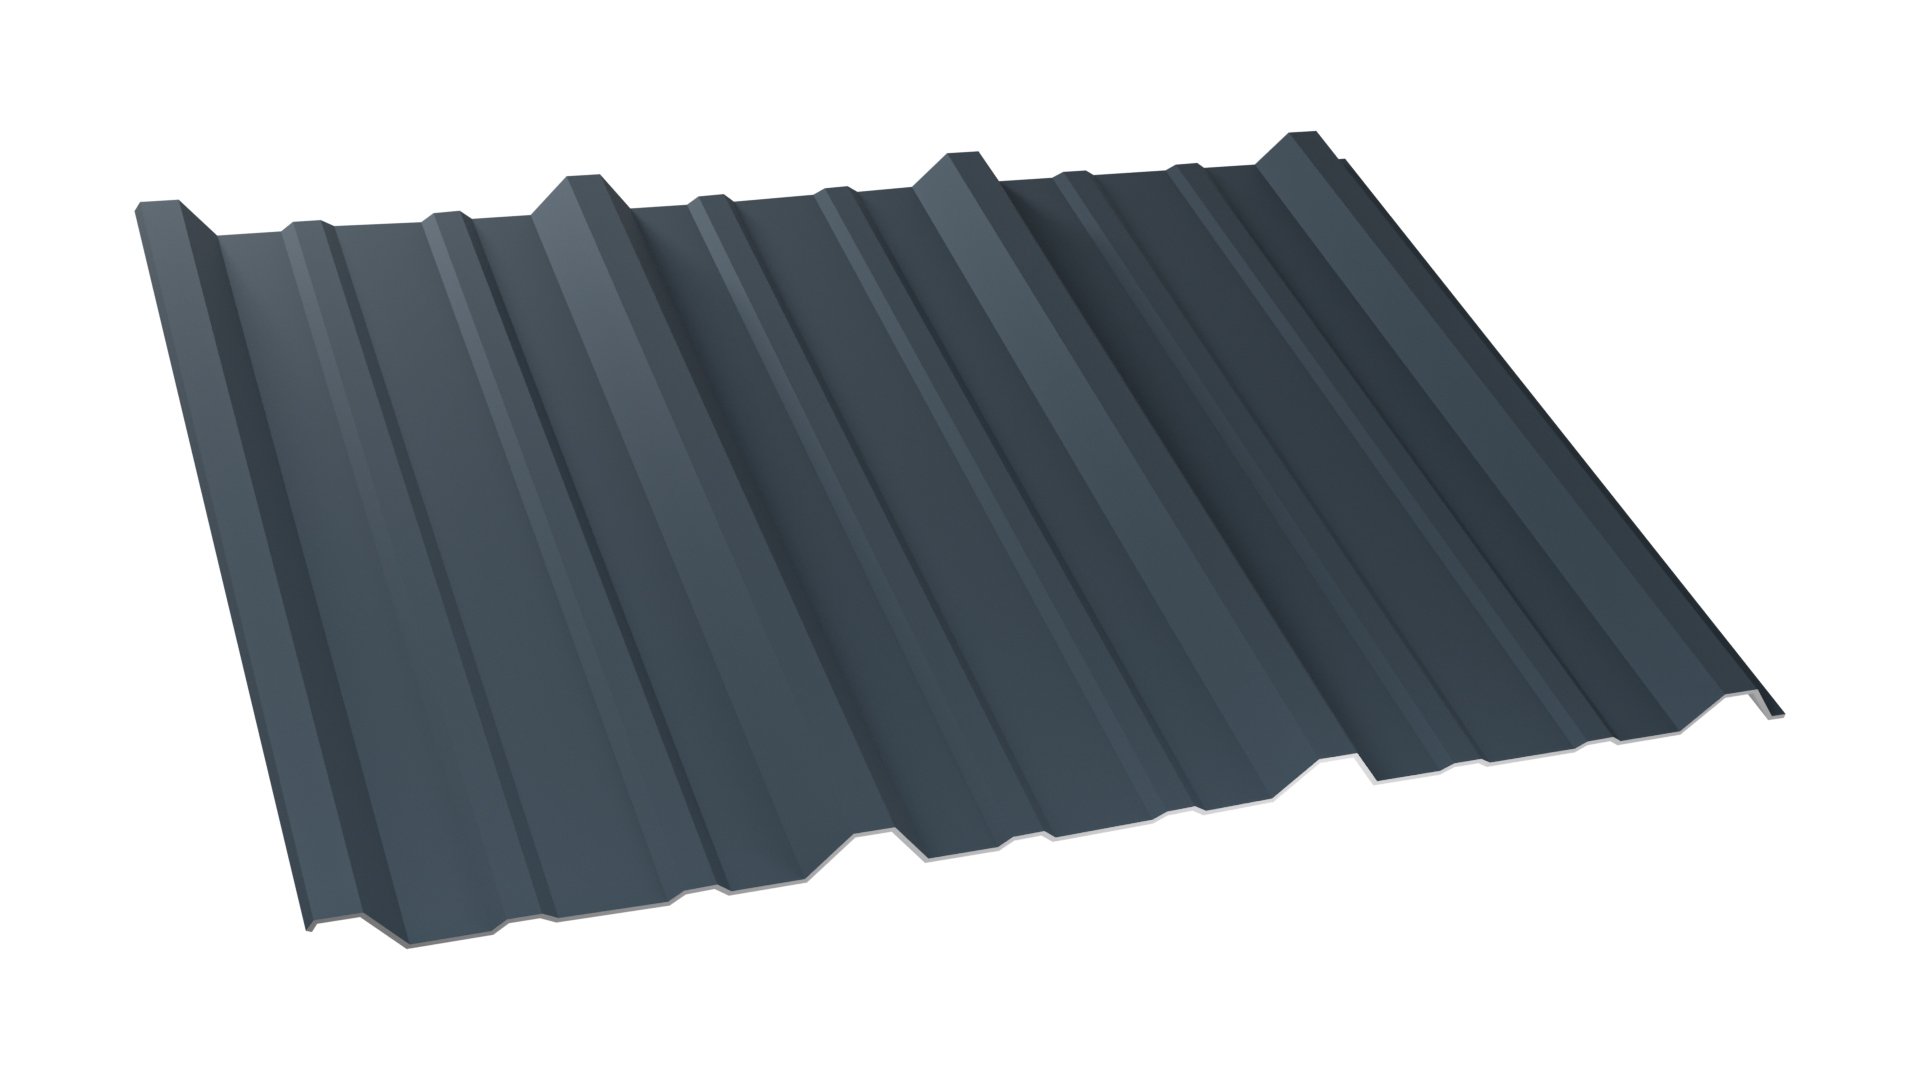 PBR Panel For Metal Roofing Applications